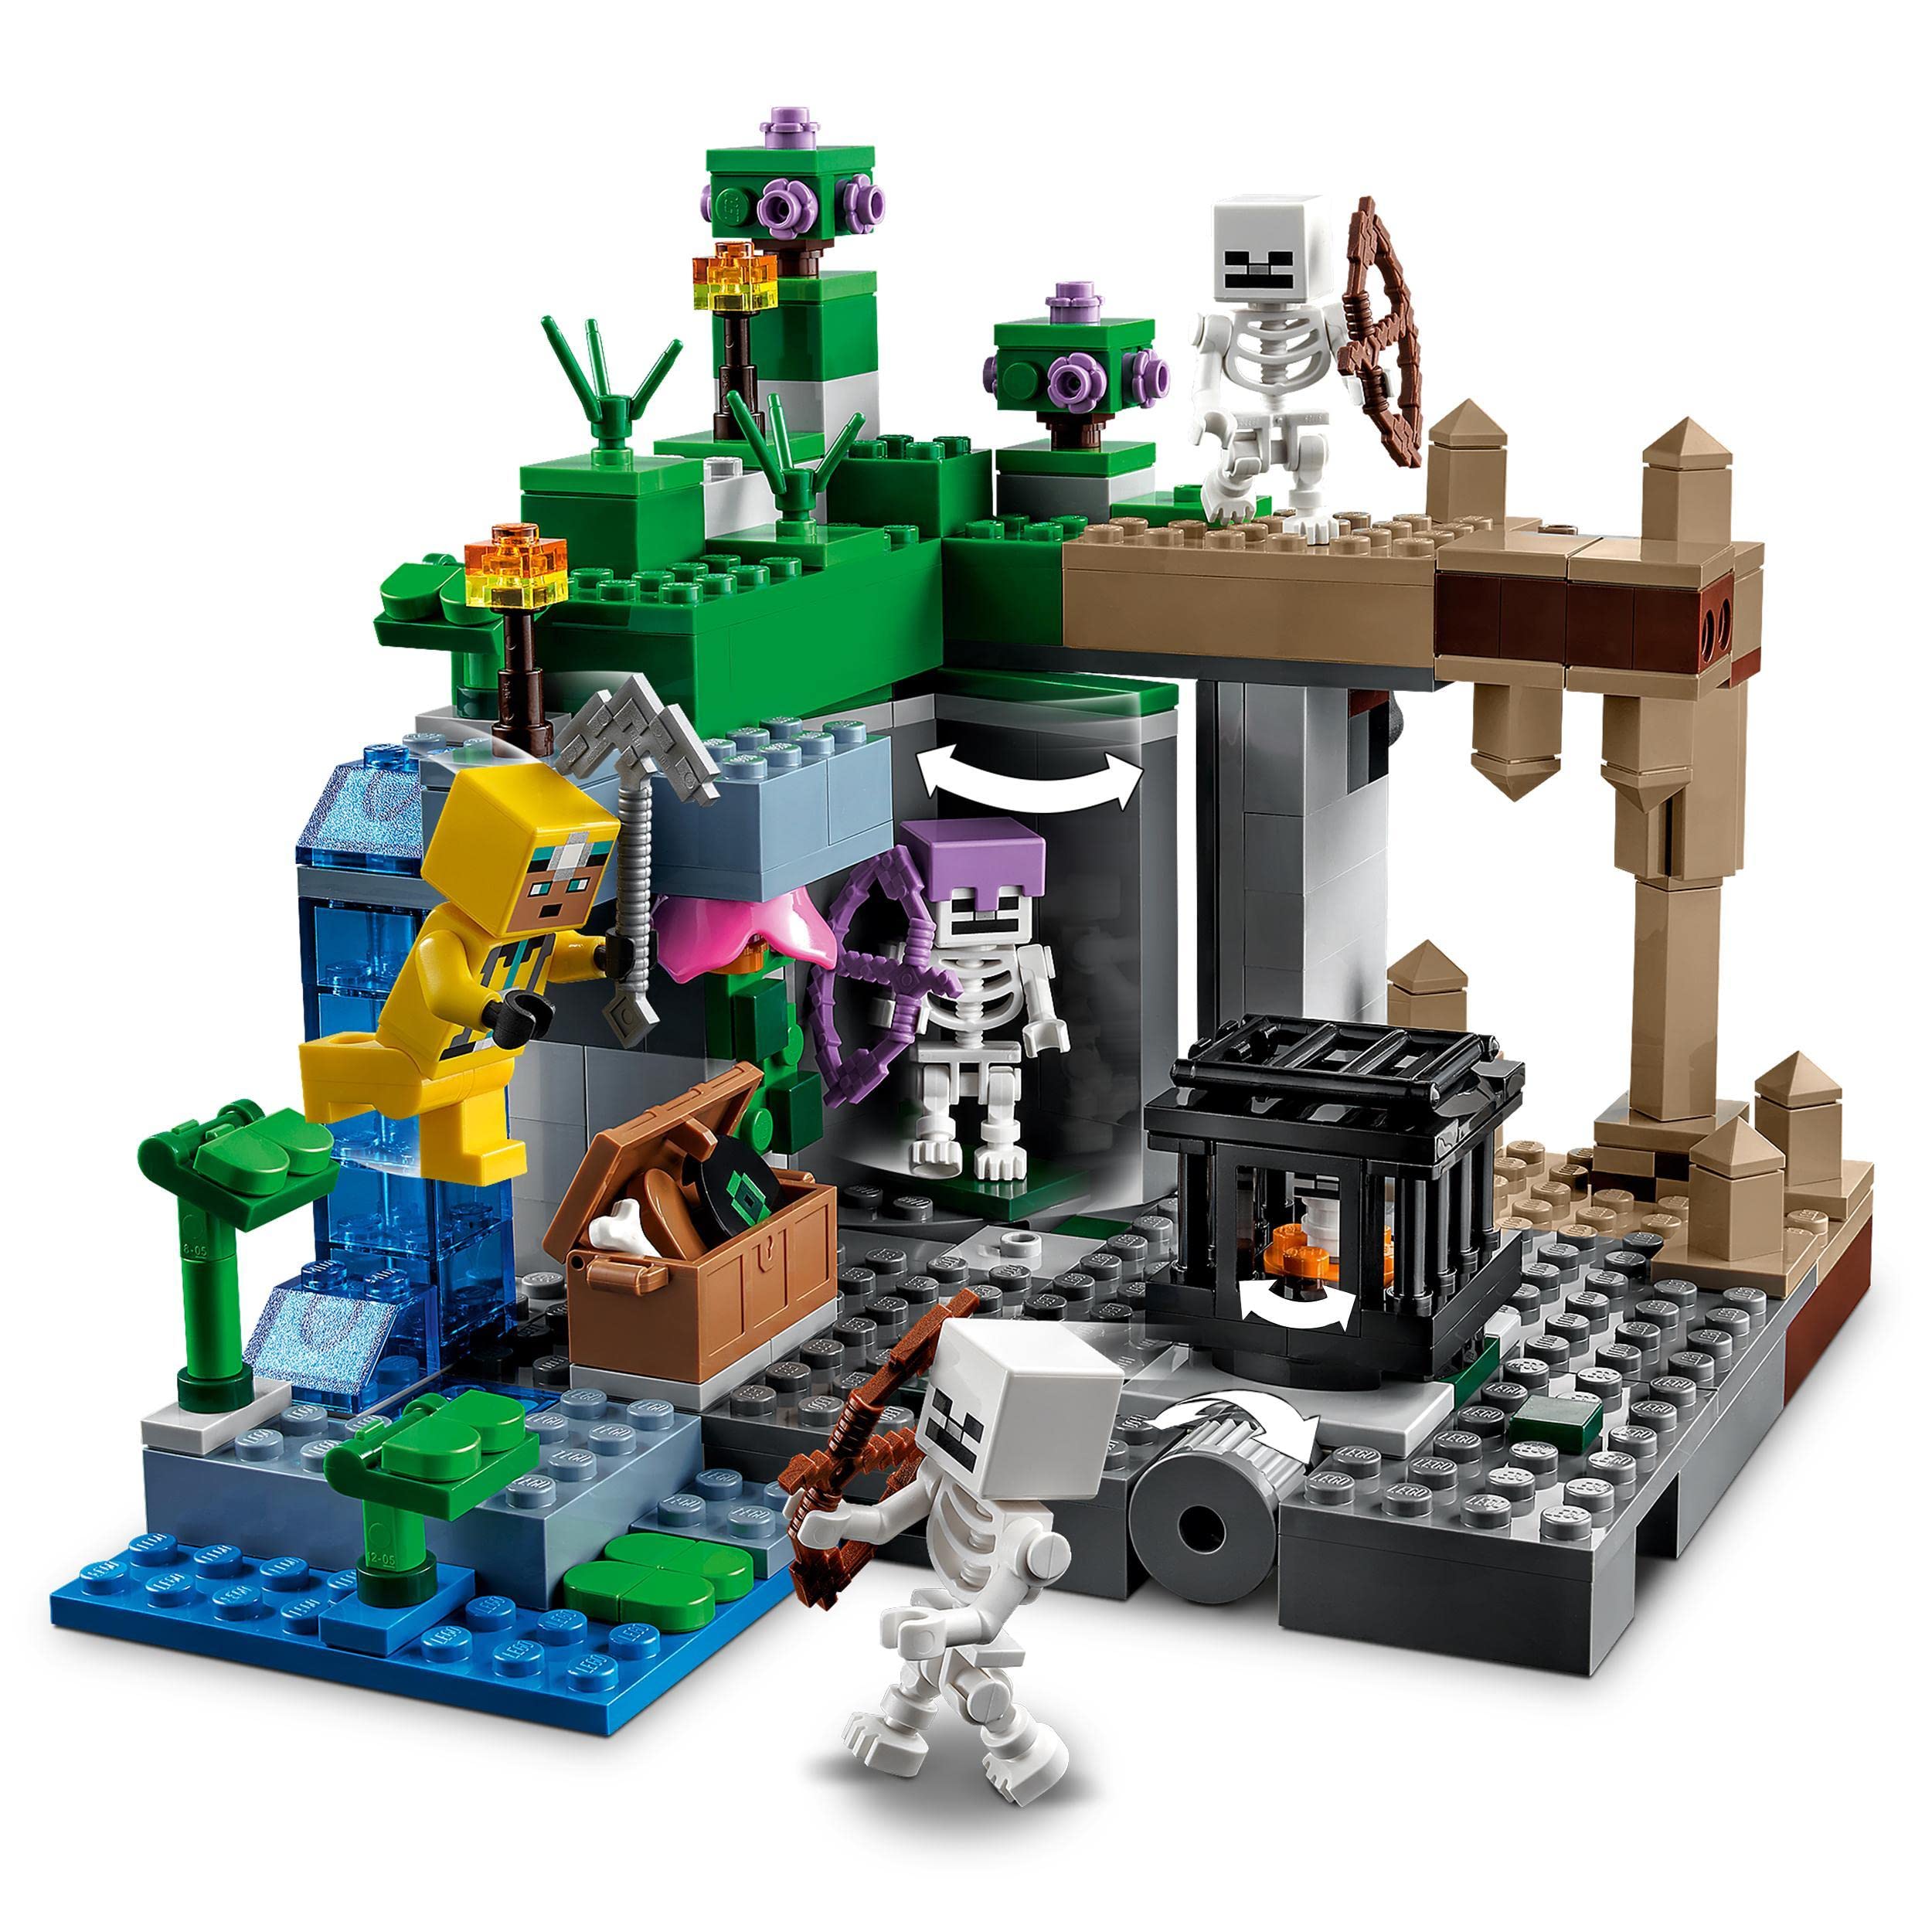 LEGO Minecraft The Skeleton Dungeon Set, Construction Toy for Kids with Caves, Mobs and Figures with Crossbow Accessories 21189